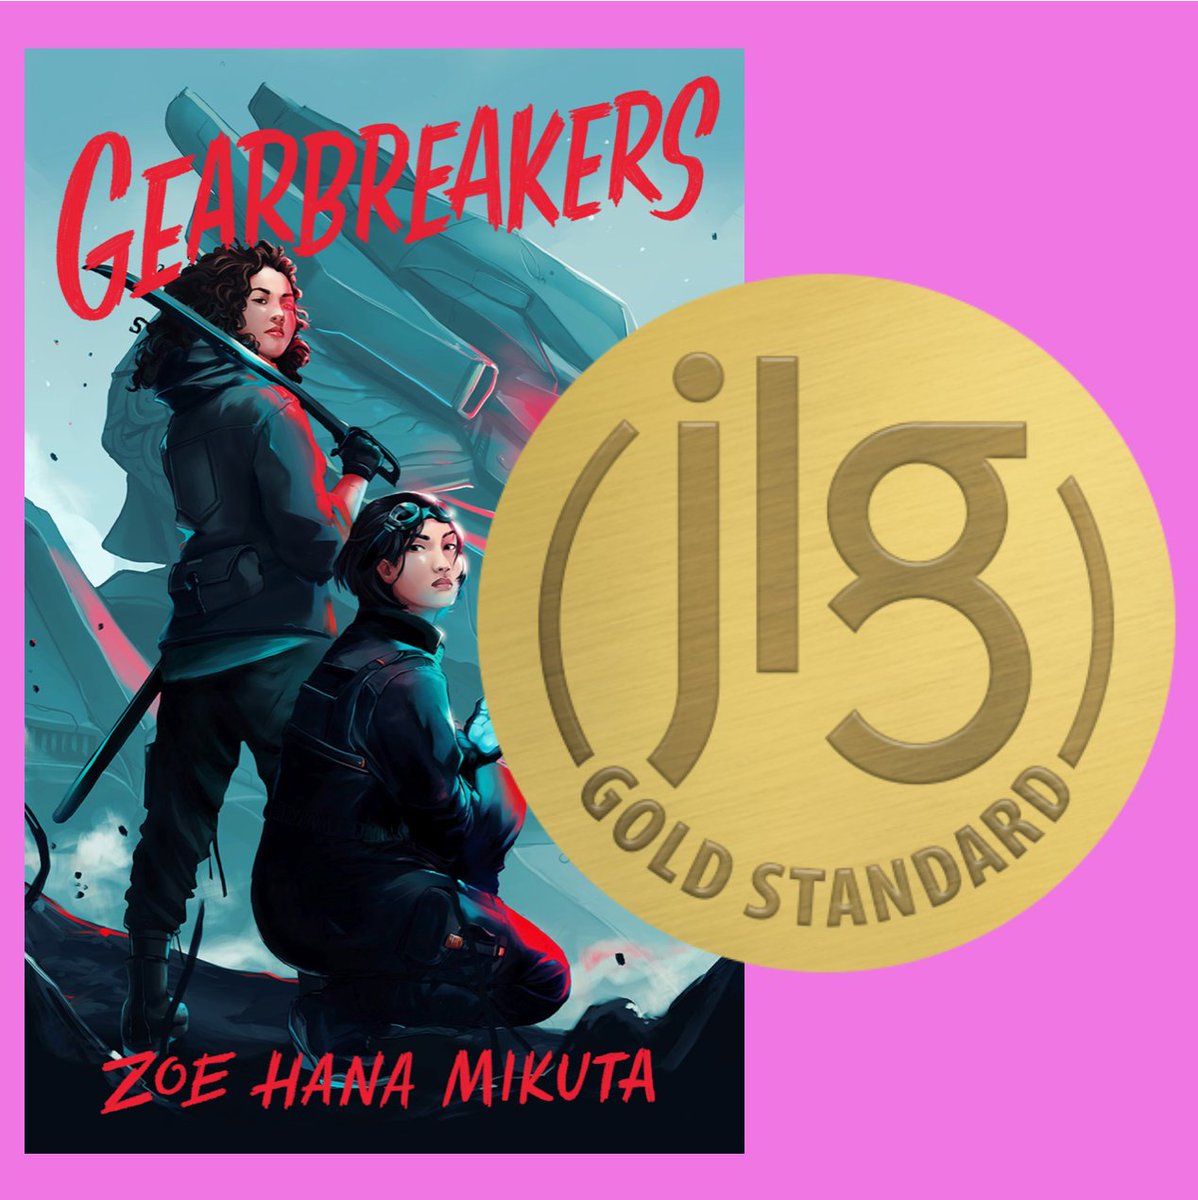 I am so happy to announce that my little sapphic cyberpunk debut GEARBREAKERS is a Junior Library Guild Selection !!! #JLGSelection 🤖💜